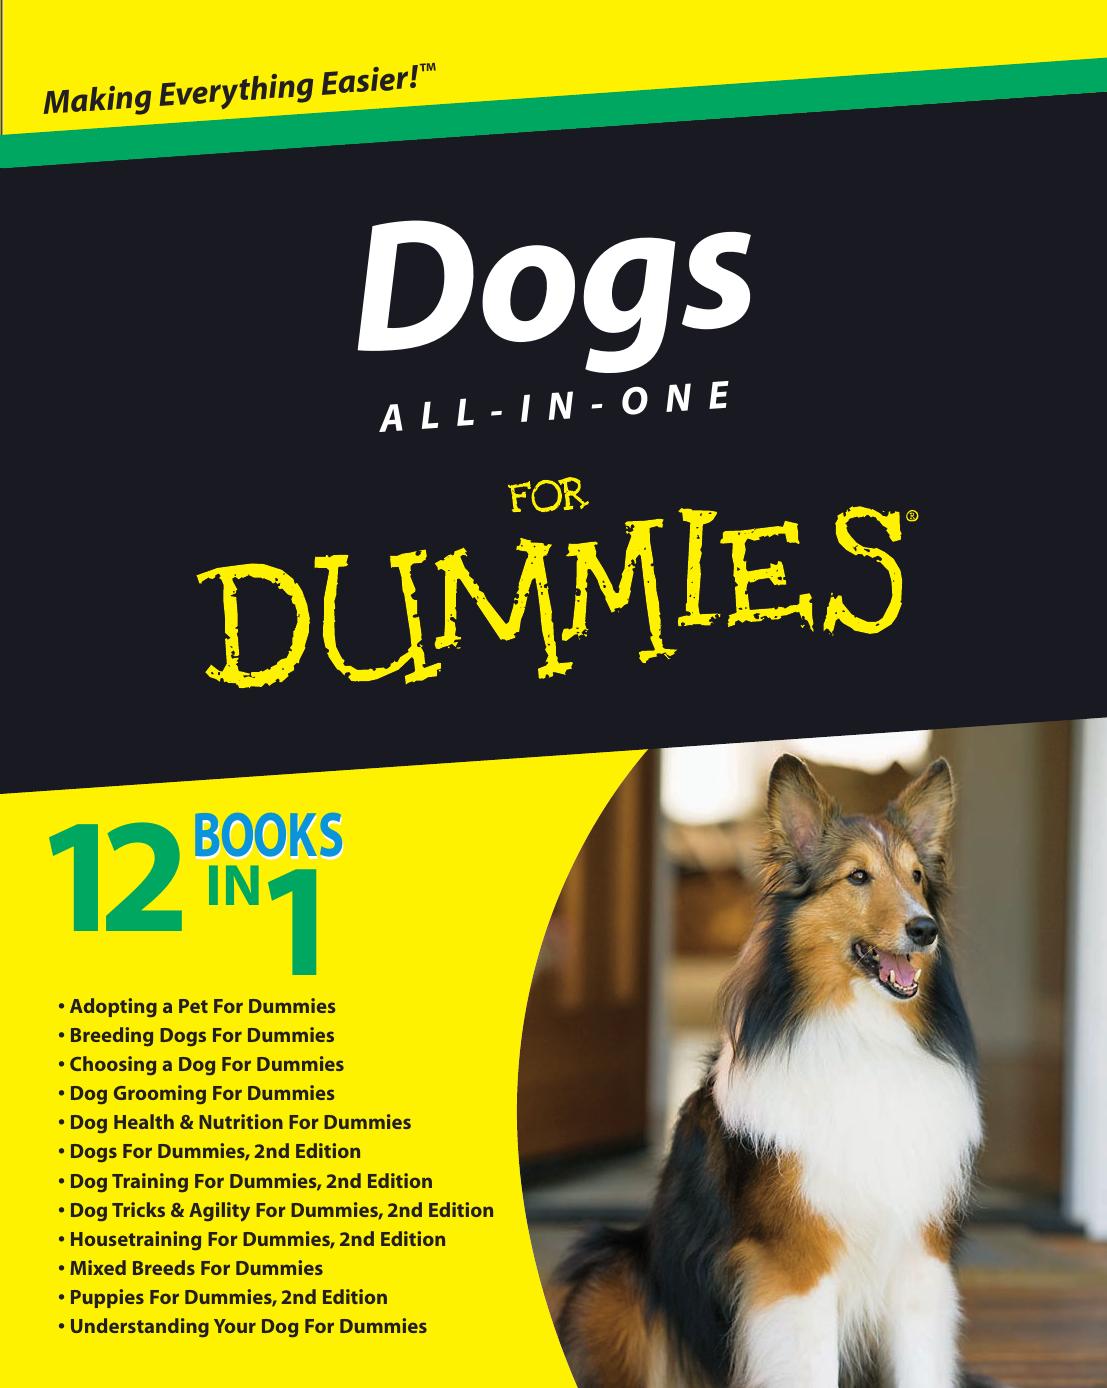 Dogs All-in-One For Dummies by Consumer Dummies